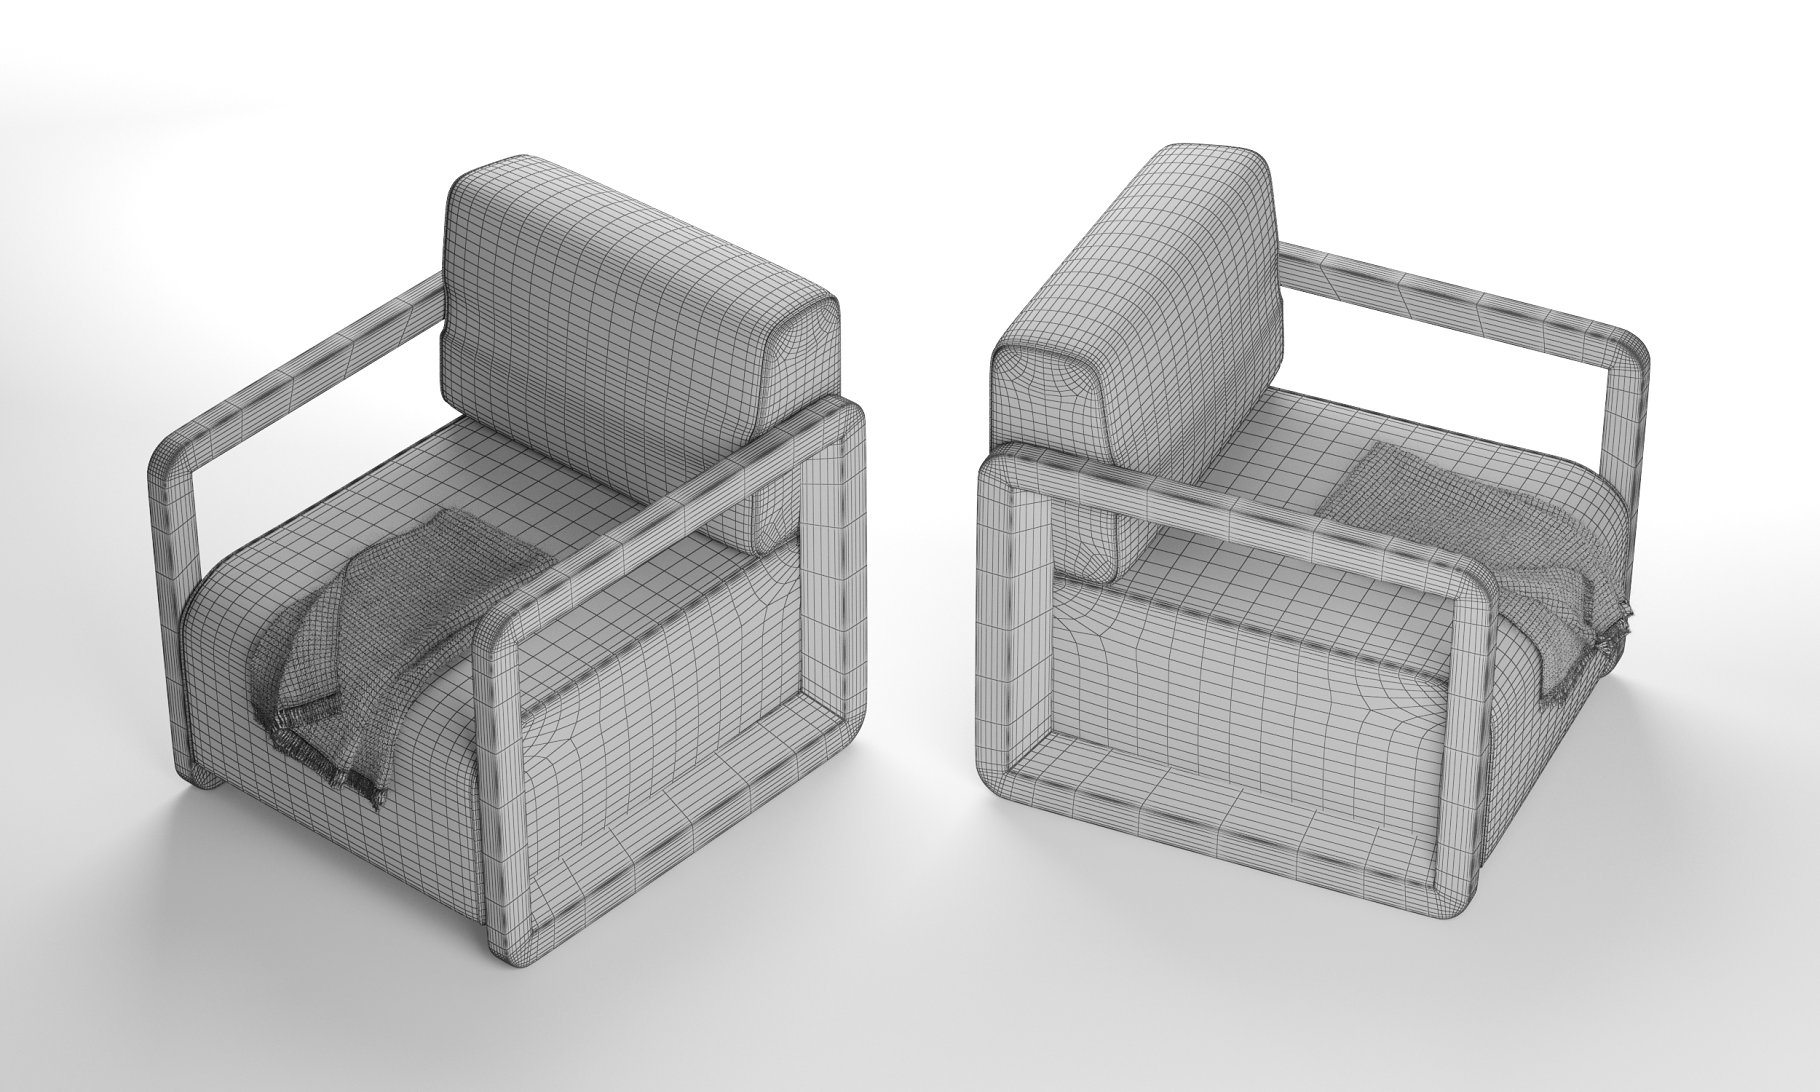 Rendering of an enchanting 3d model of an upholstered armchair without textures